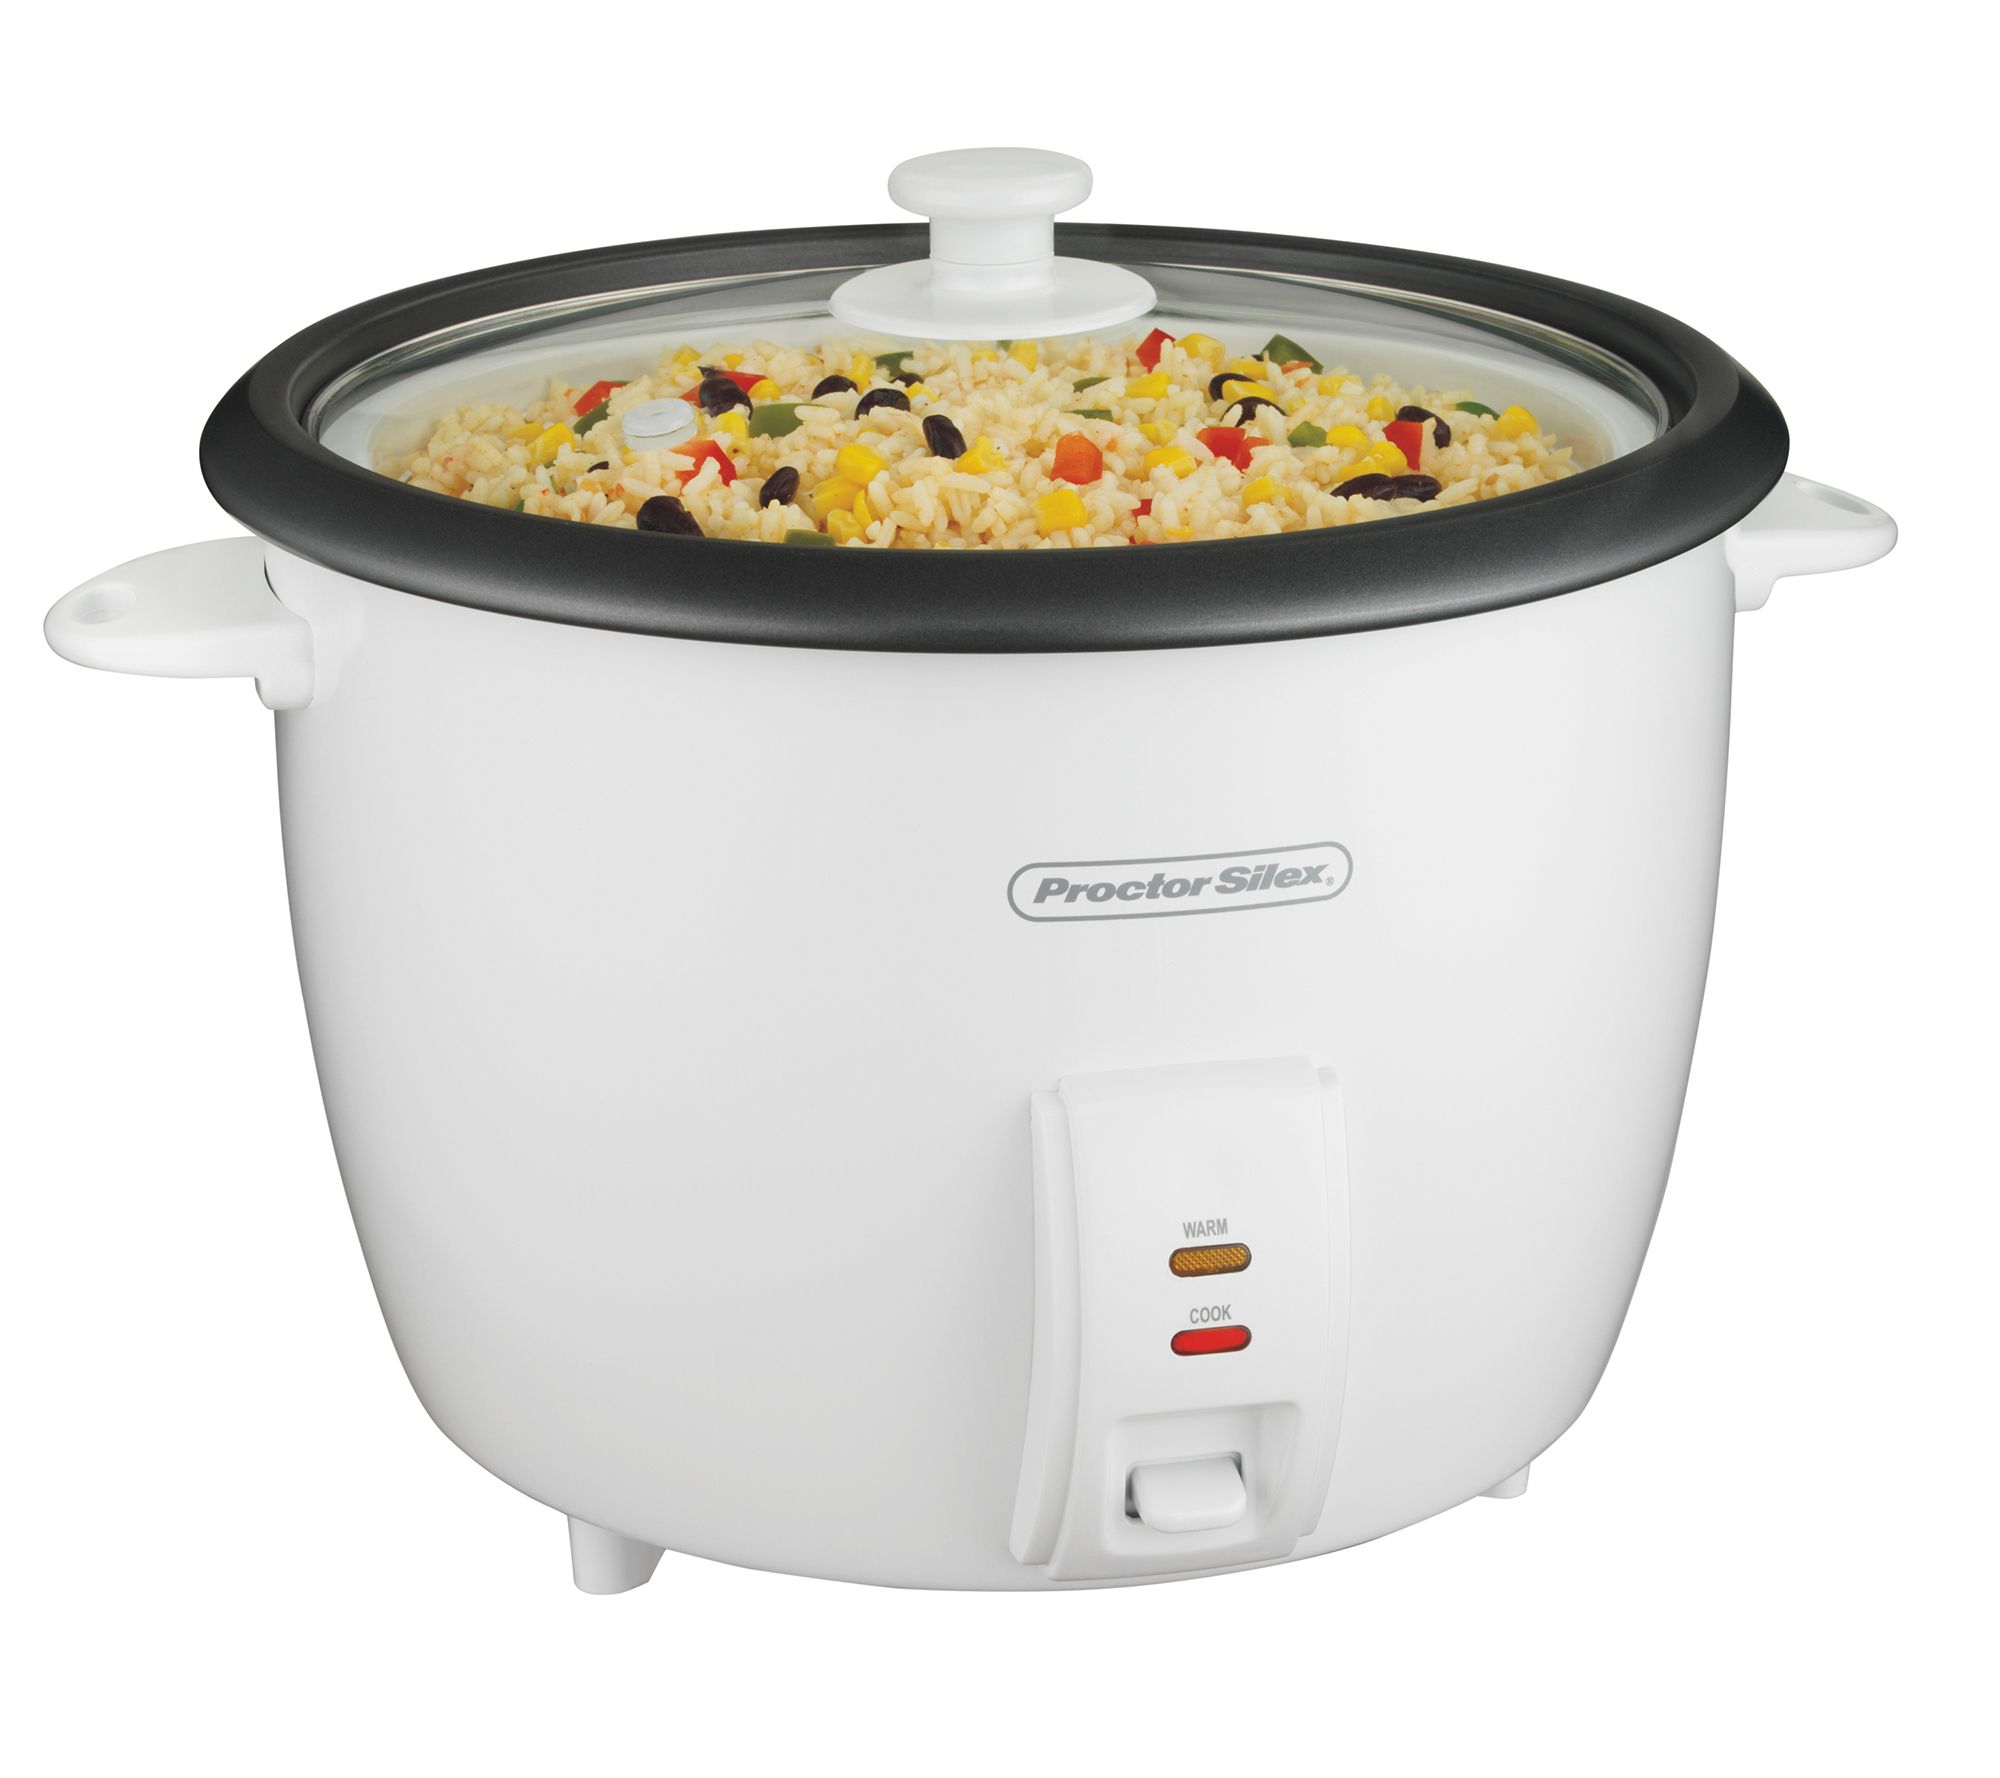 Insulated Rice Cooker by Proctor Silex